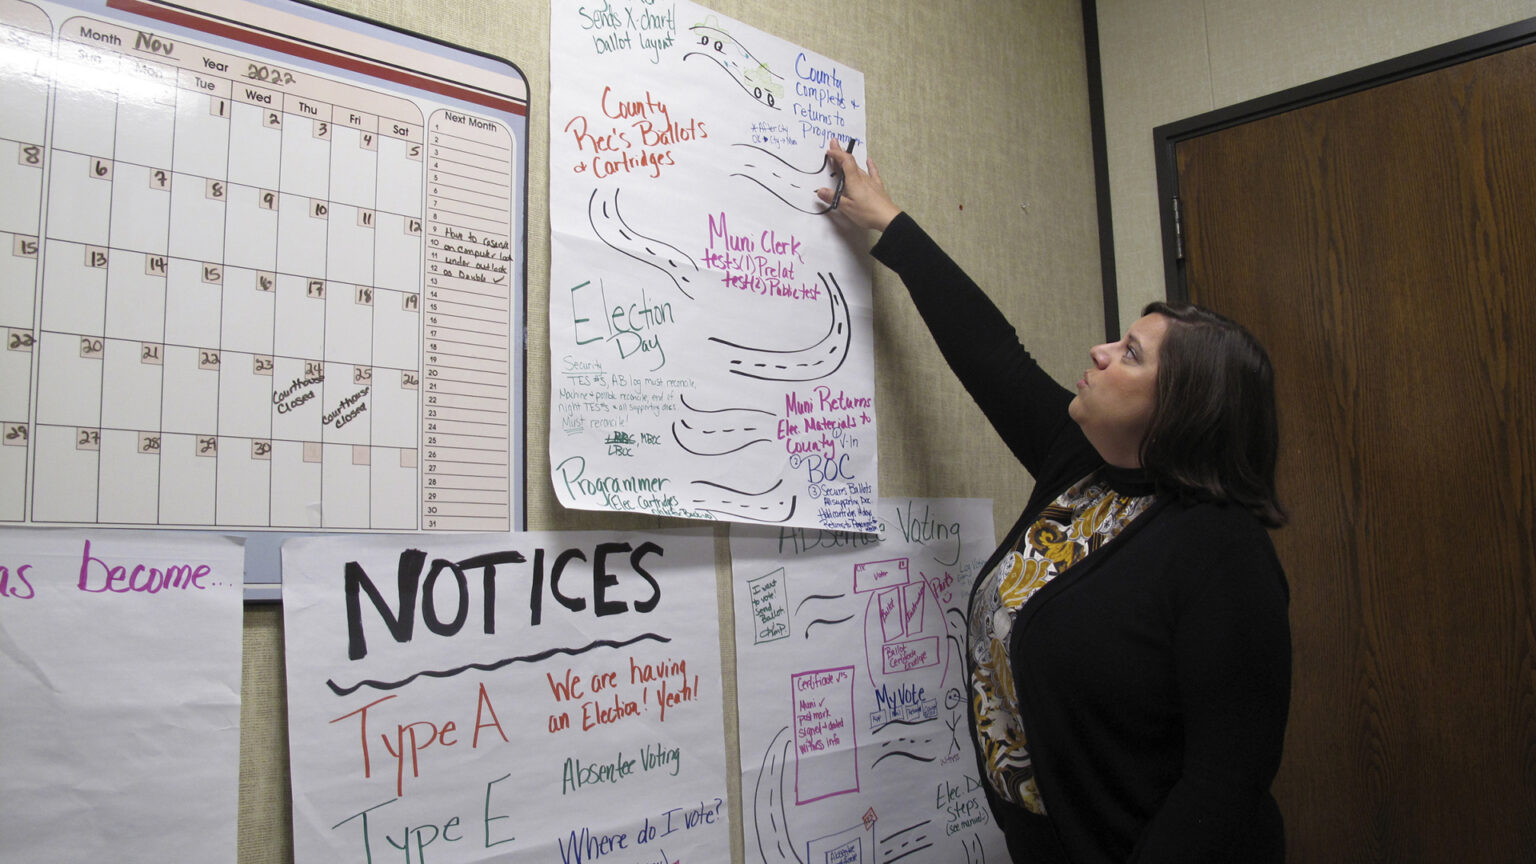 Kim Pytelski points with her right hand toward a piece of poster paper attached to a wall that is covered with a hand-drawn infographic, with other pieces of paper and a dry-erase calendar also mounted on the wall.